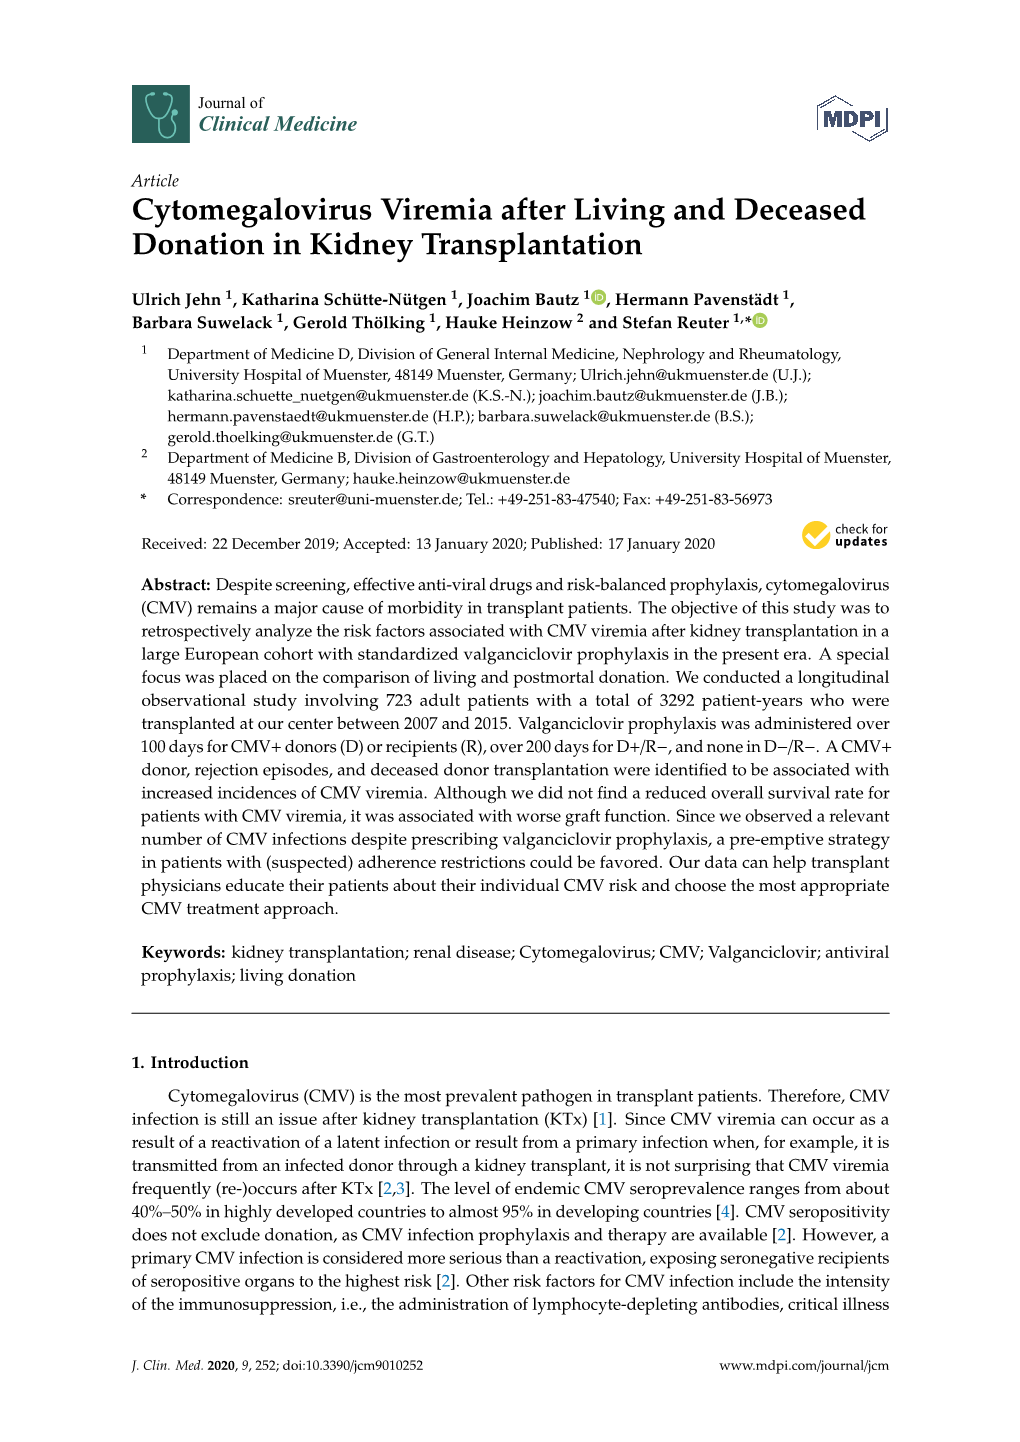 Cytomegalovirus Viremia After Living and Deceased Donation in Kidney Transplantation